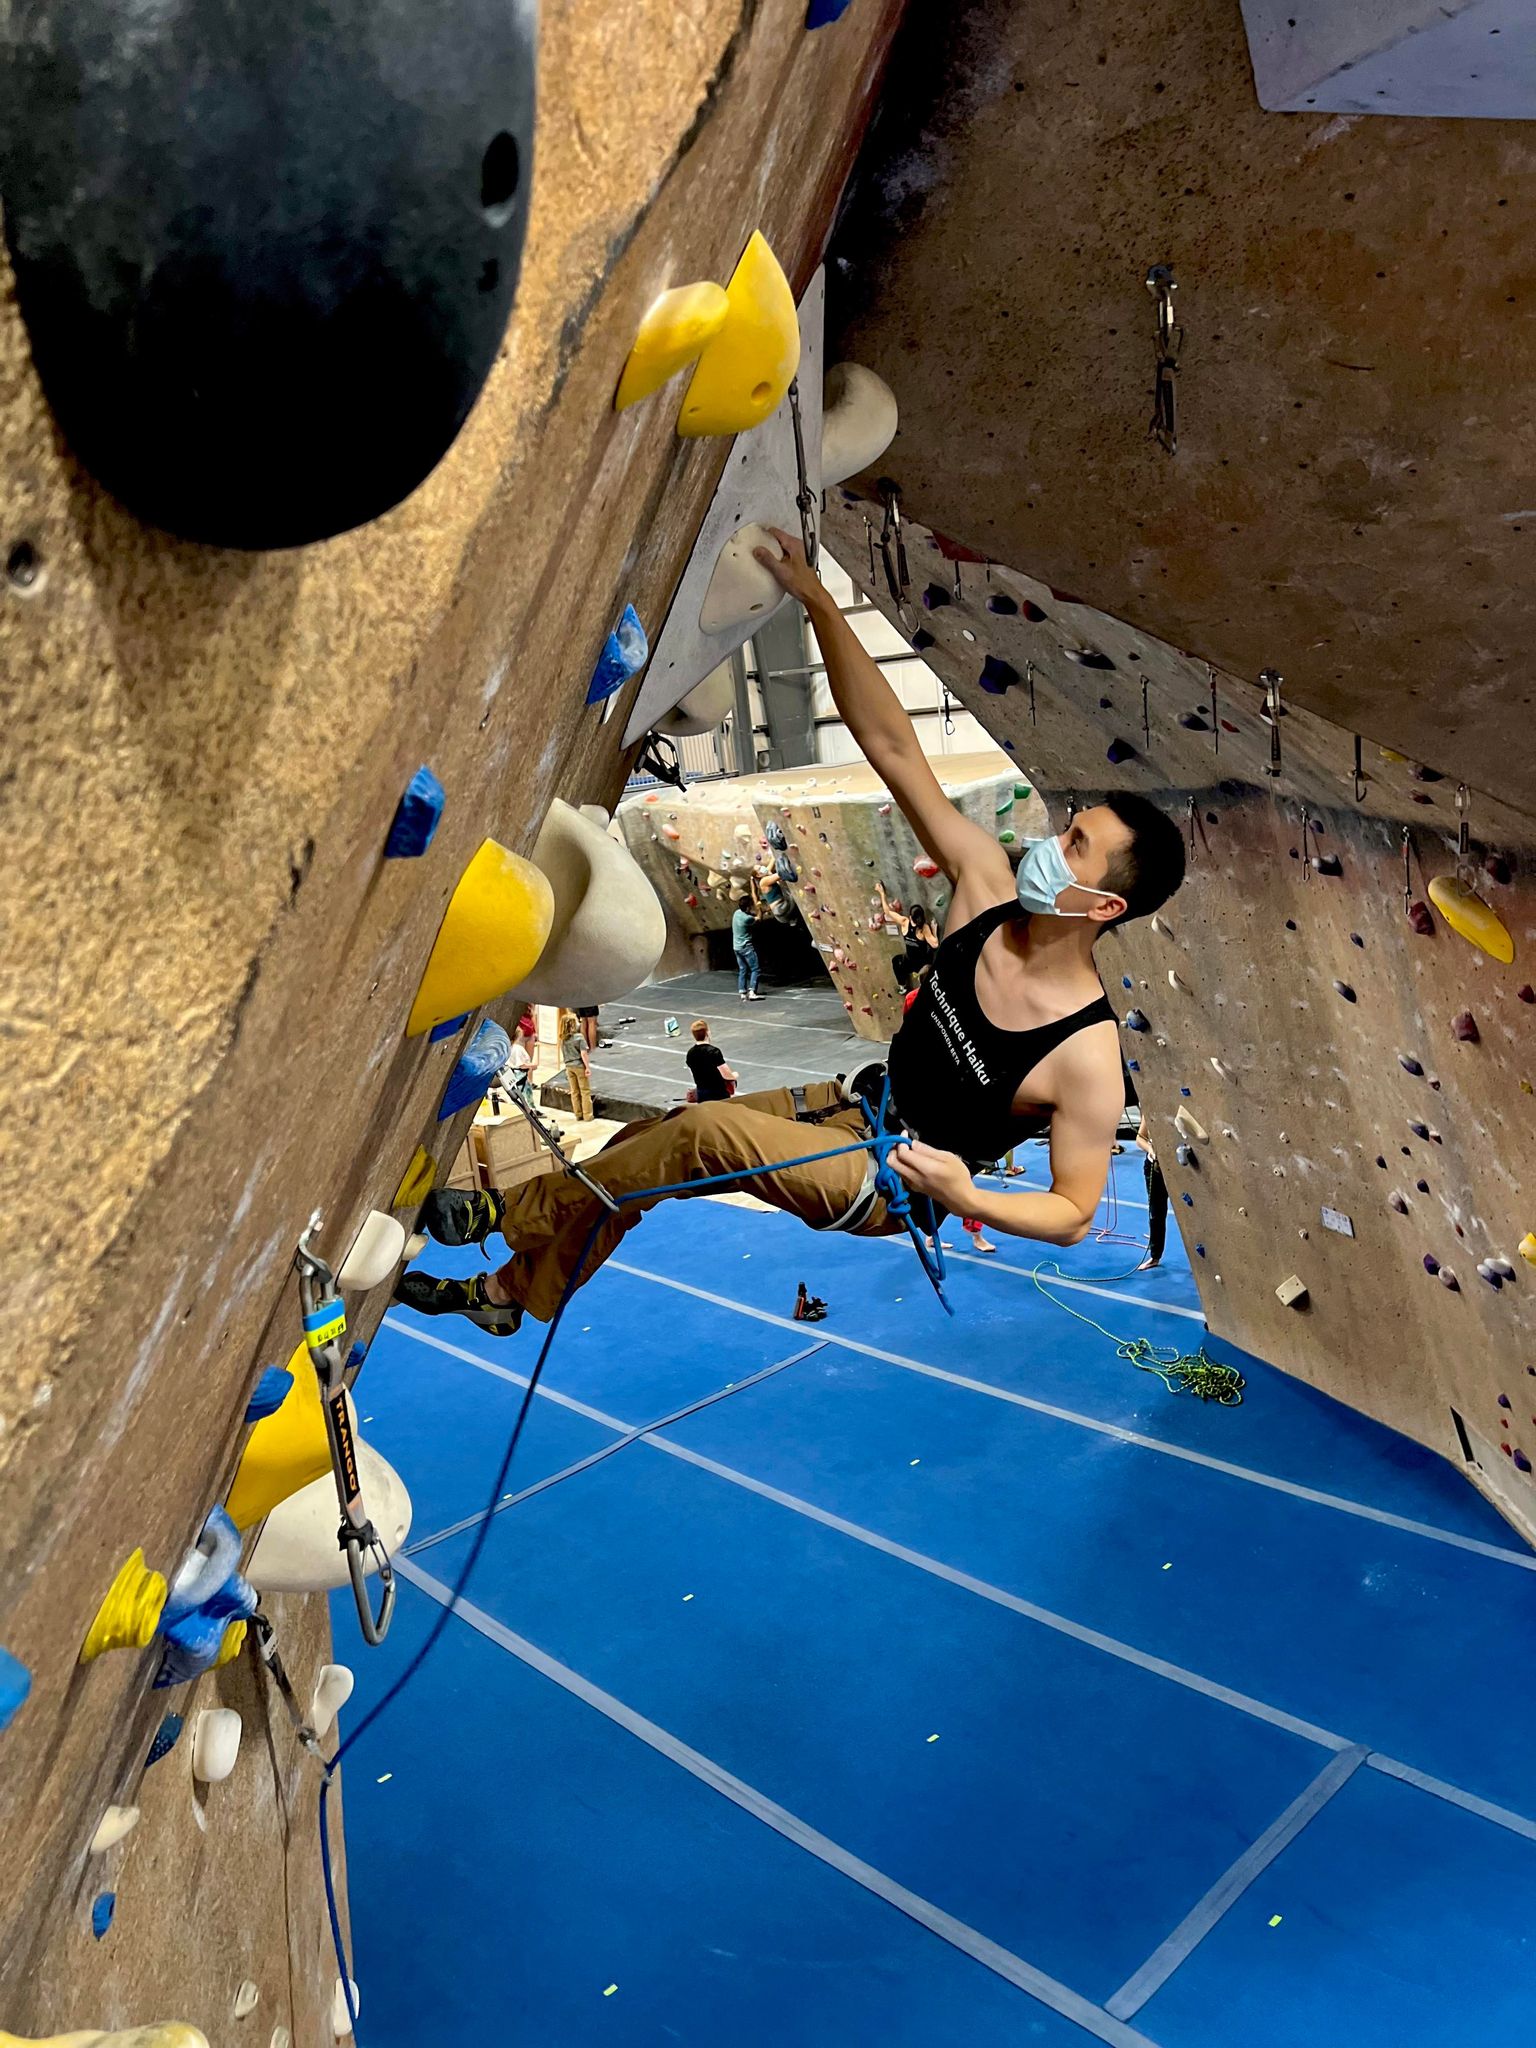 Charcoal black tank top shirt with "Technique Haiku, Unspoken Beta" on the front worn by male lead climbing on a climbing wall in the gym